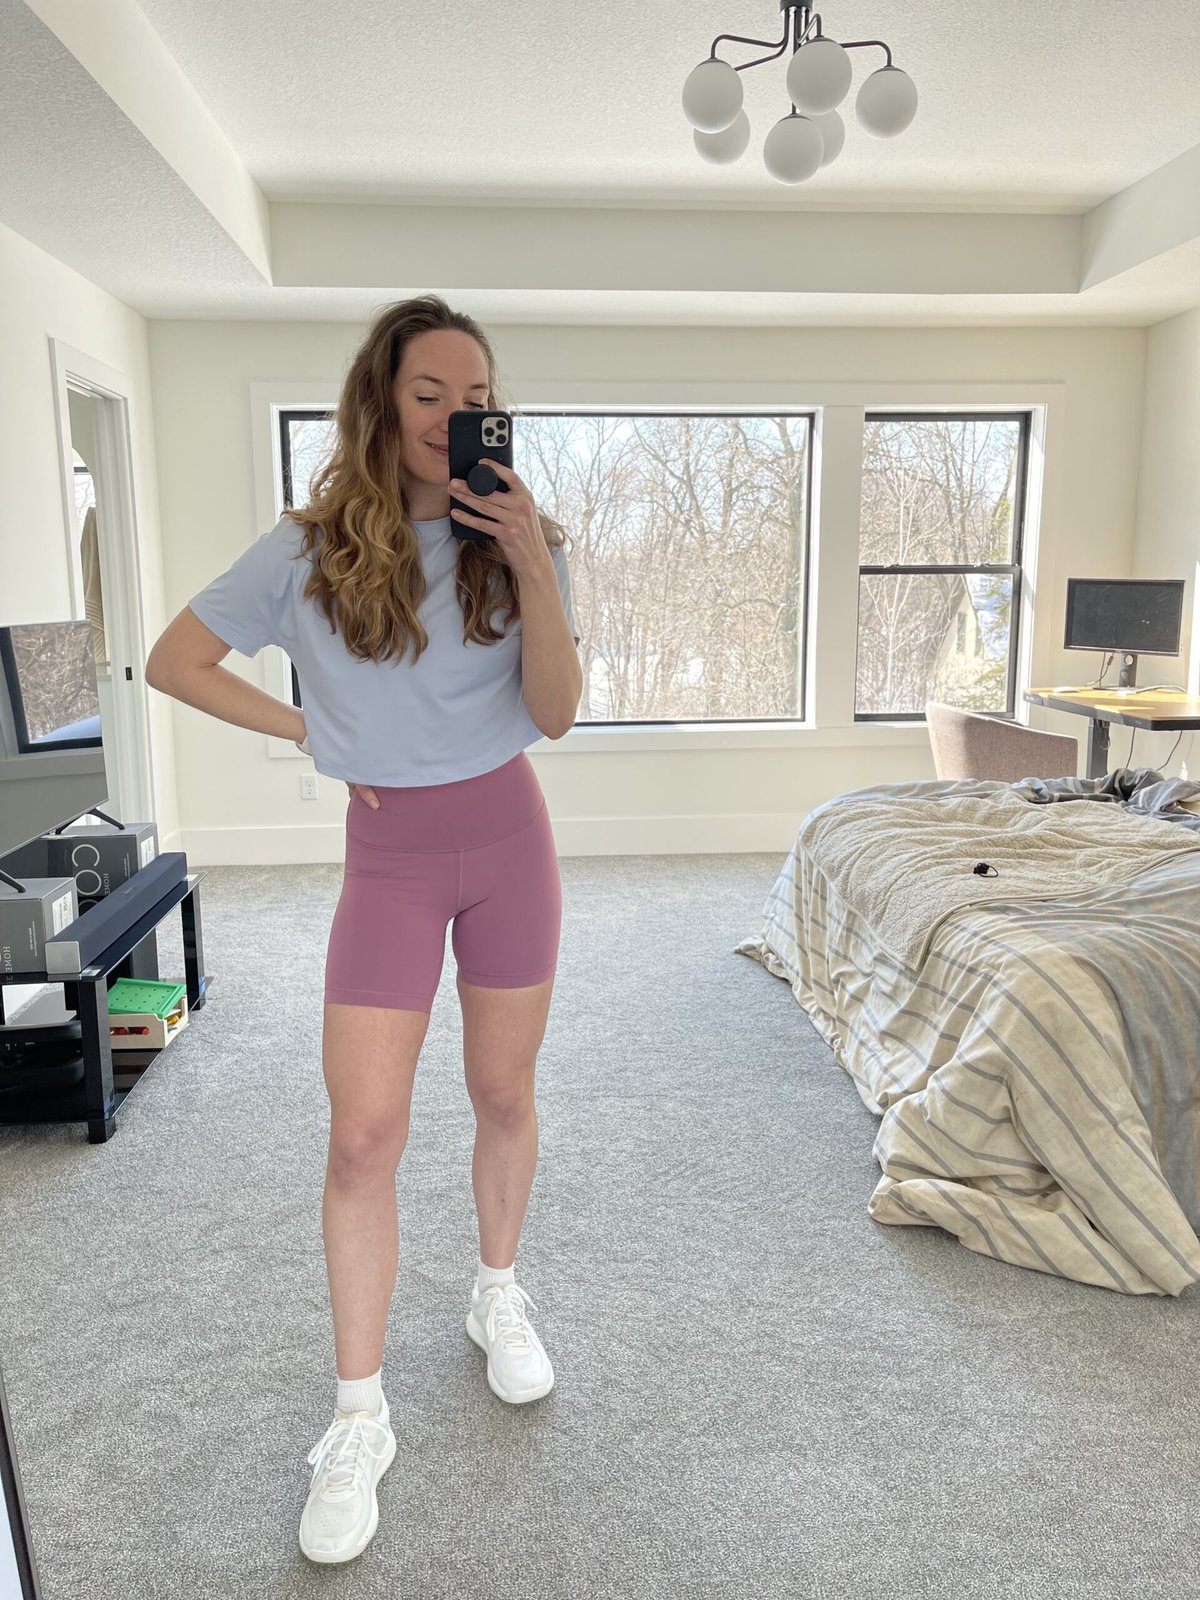 The Best lululemon Workout Shorts - Living My Bex Life